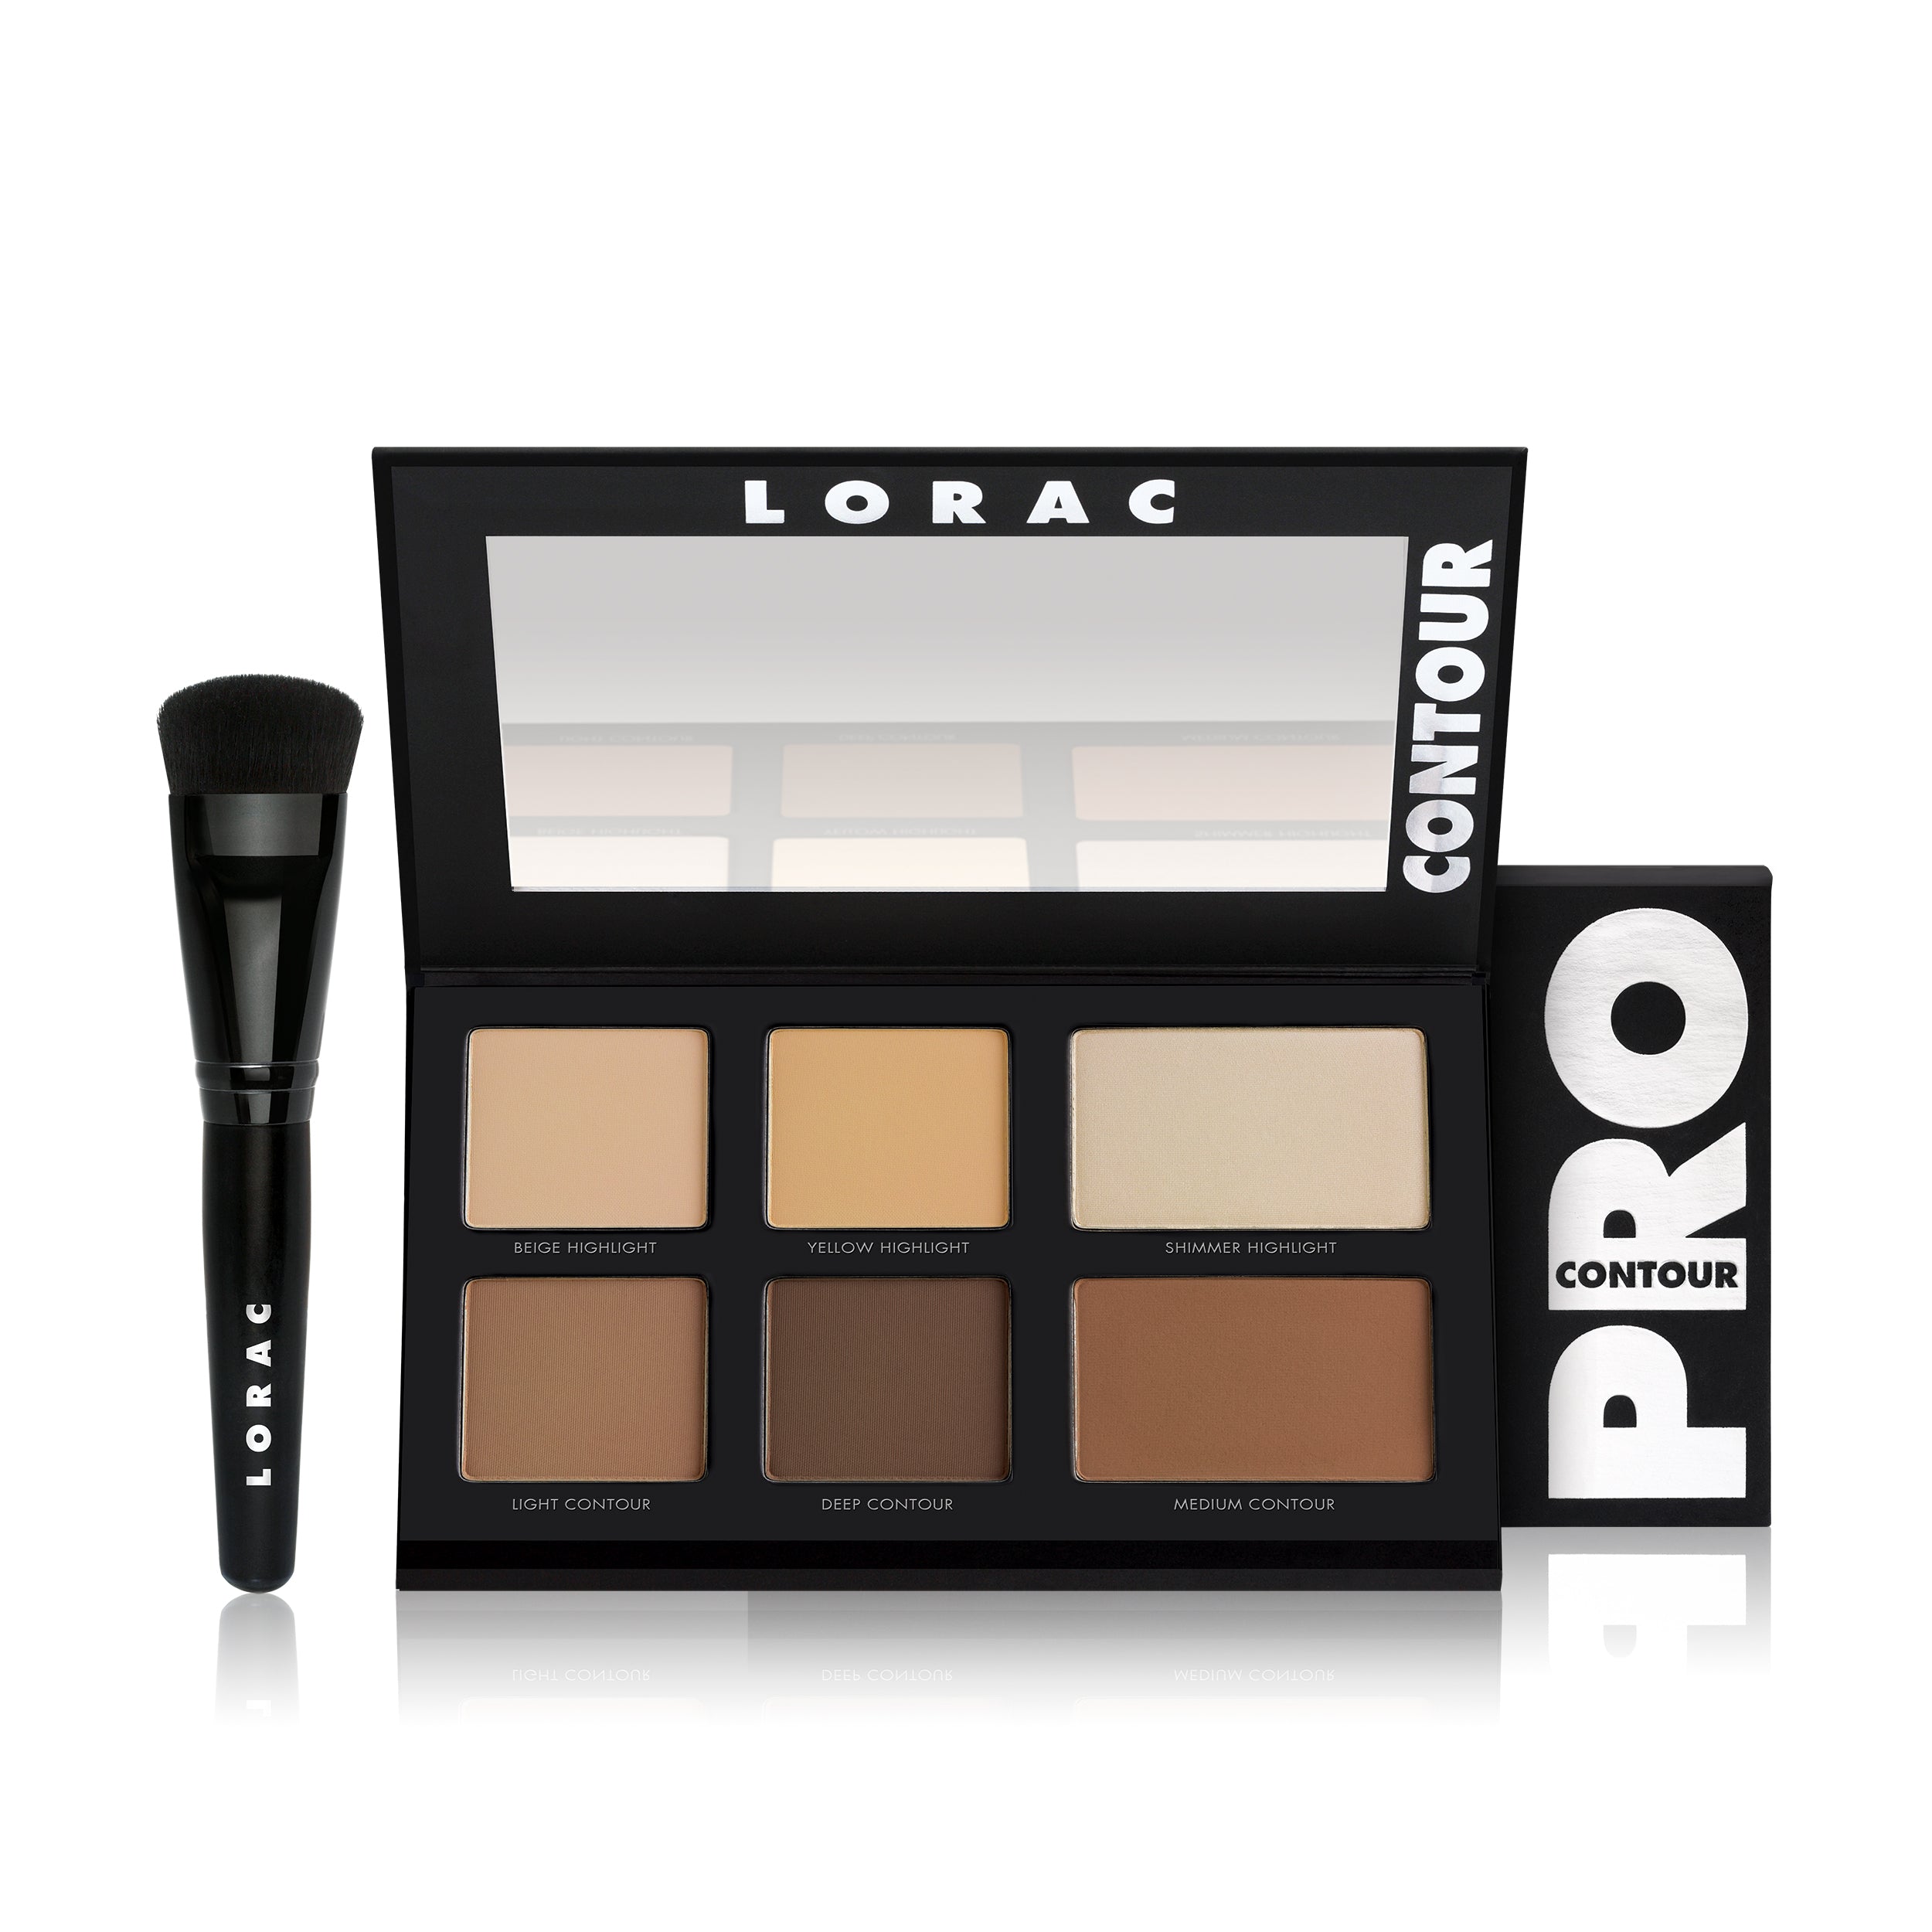 Preview, LORAC, Cosmetics, PRO, Contour, Palette, For, Summer, Fall, 2015